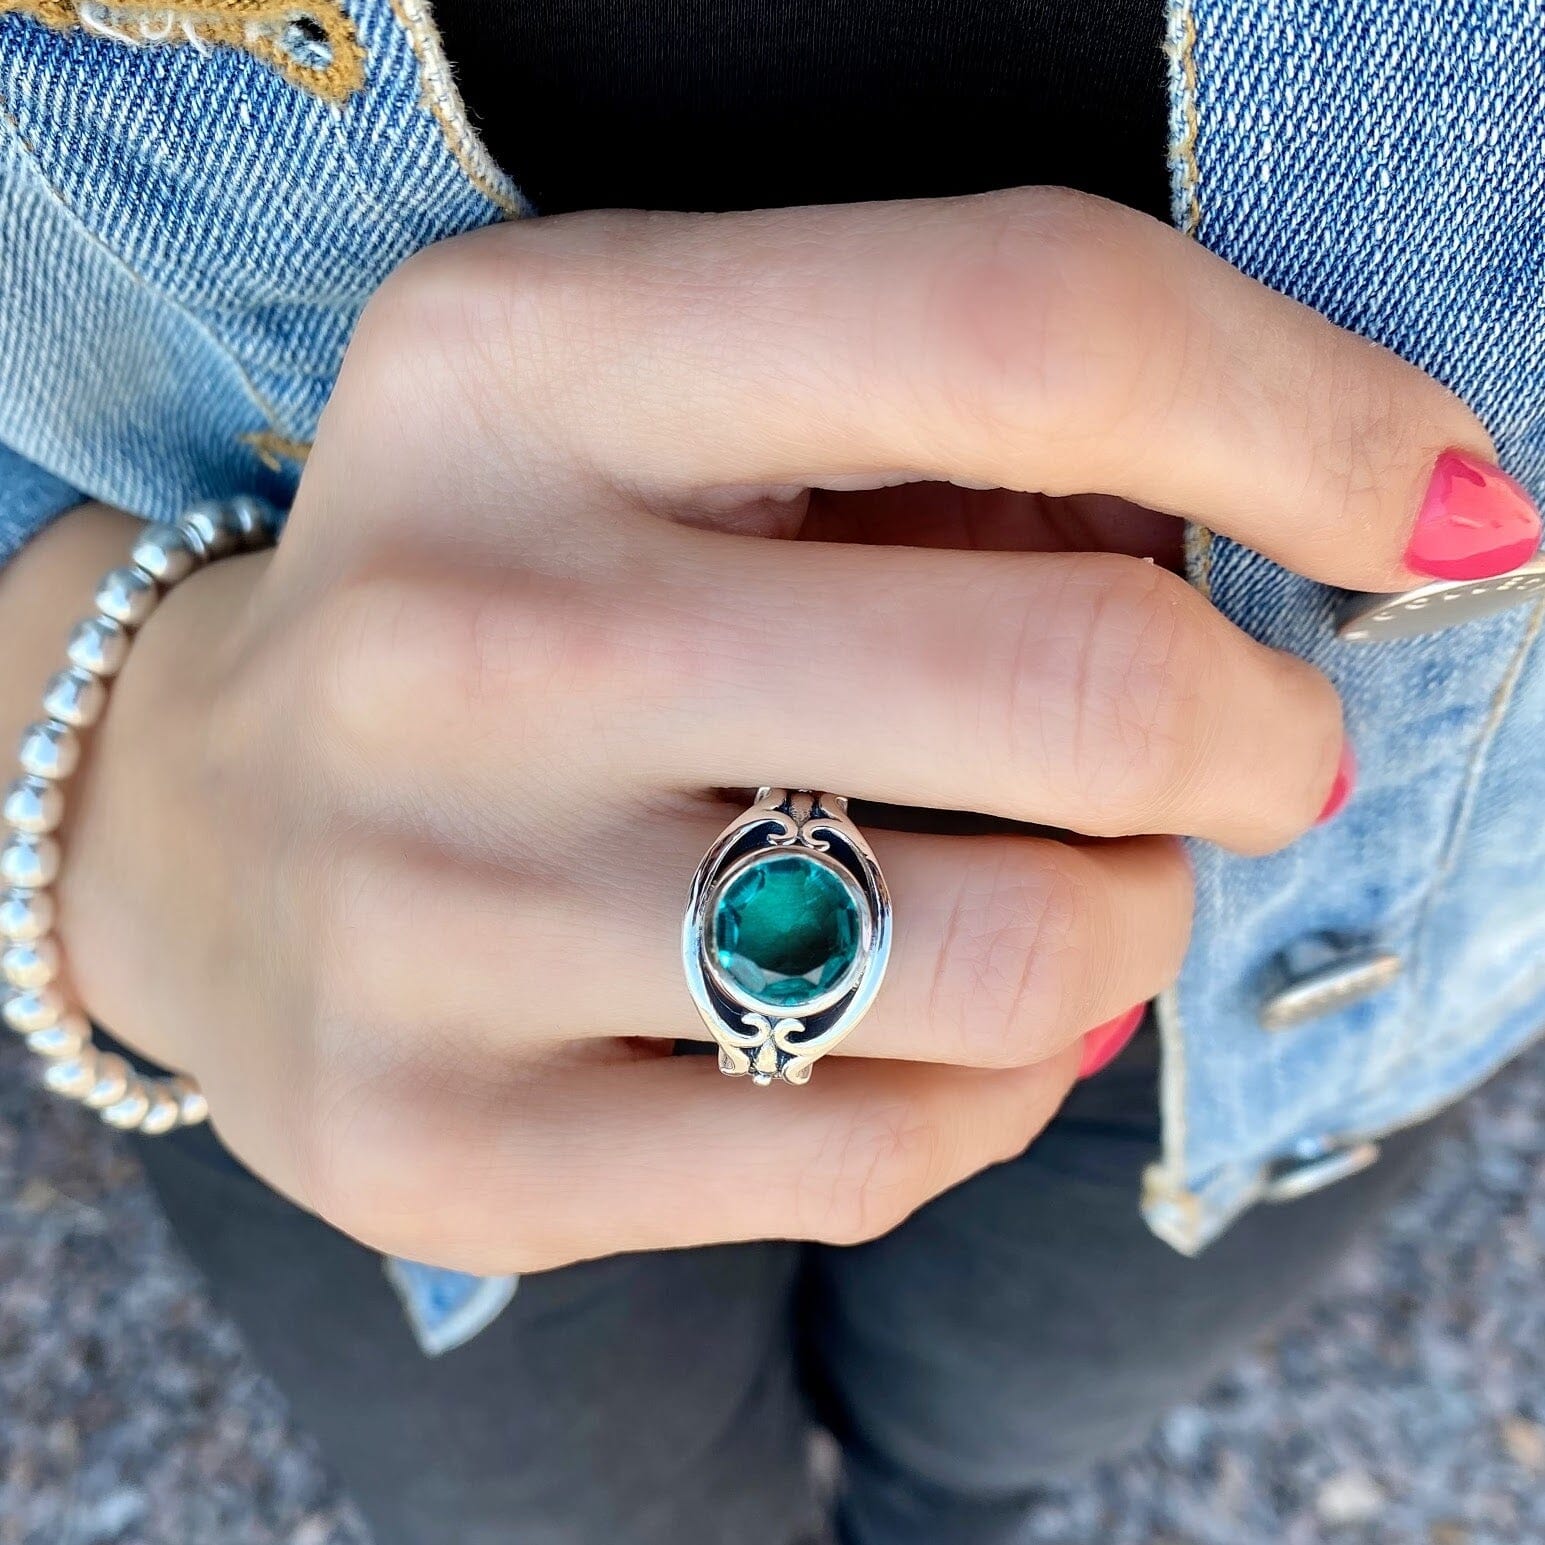 Blue green stone ring with .925 sterling silver